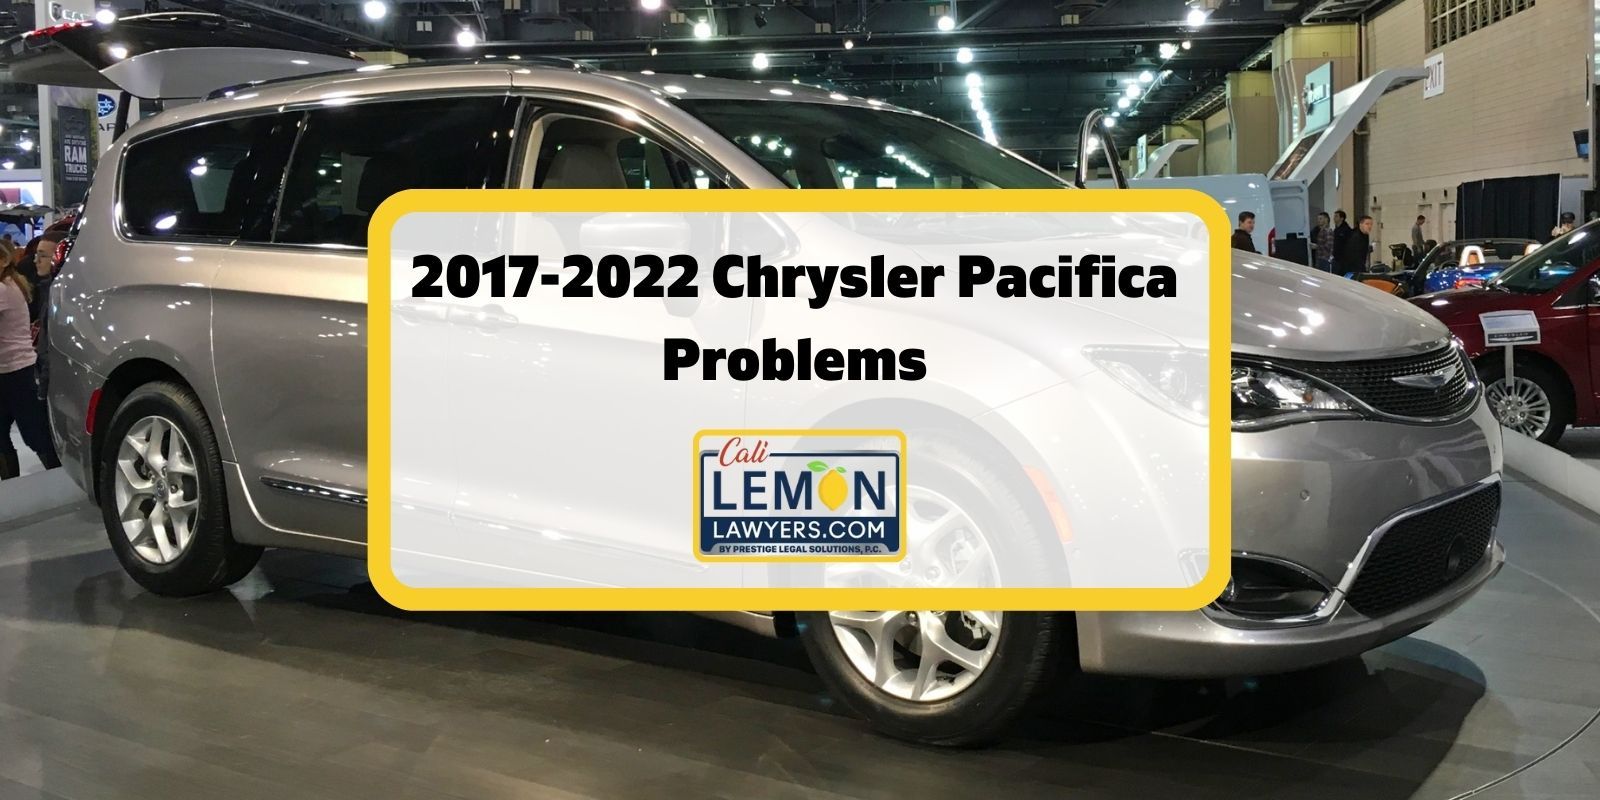 2017-2022 Chrysler Pacifica Problems